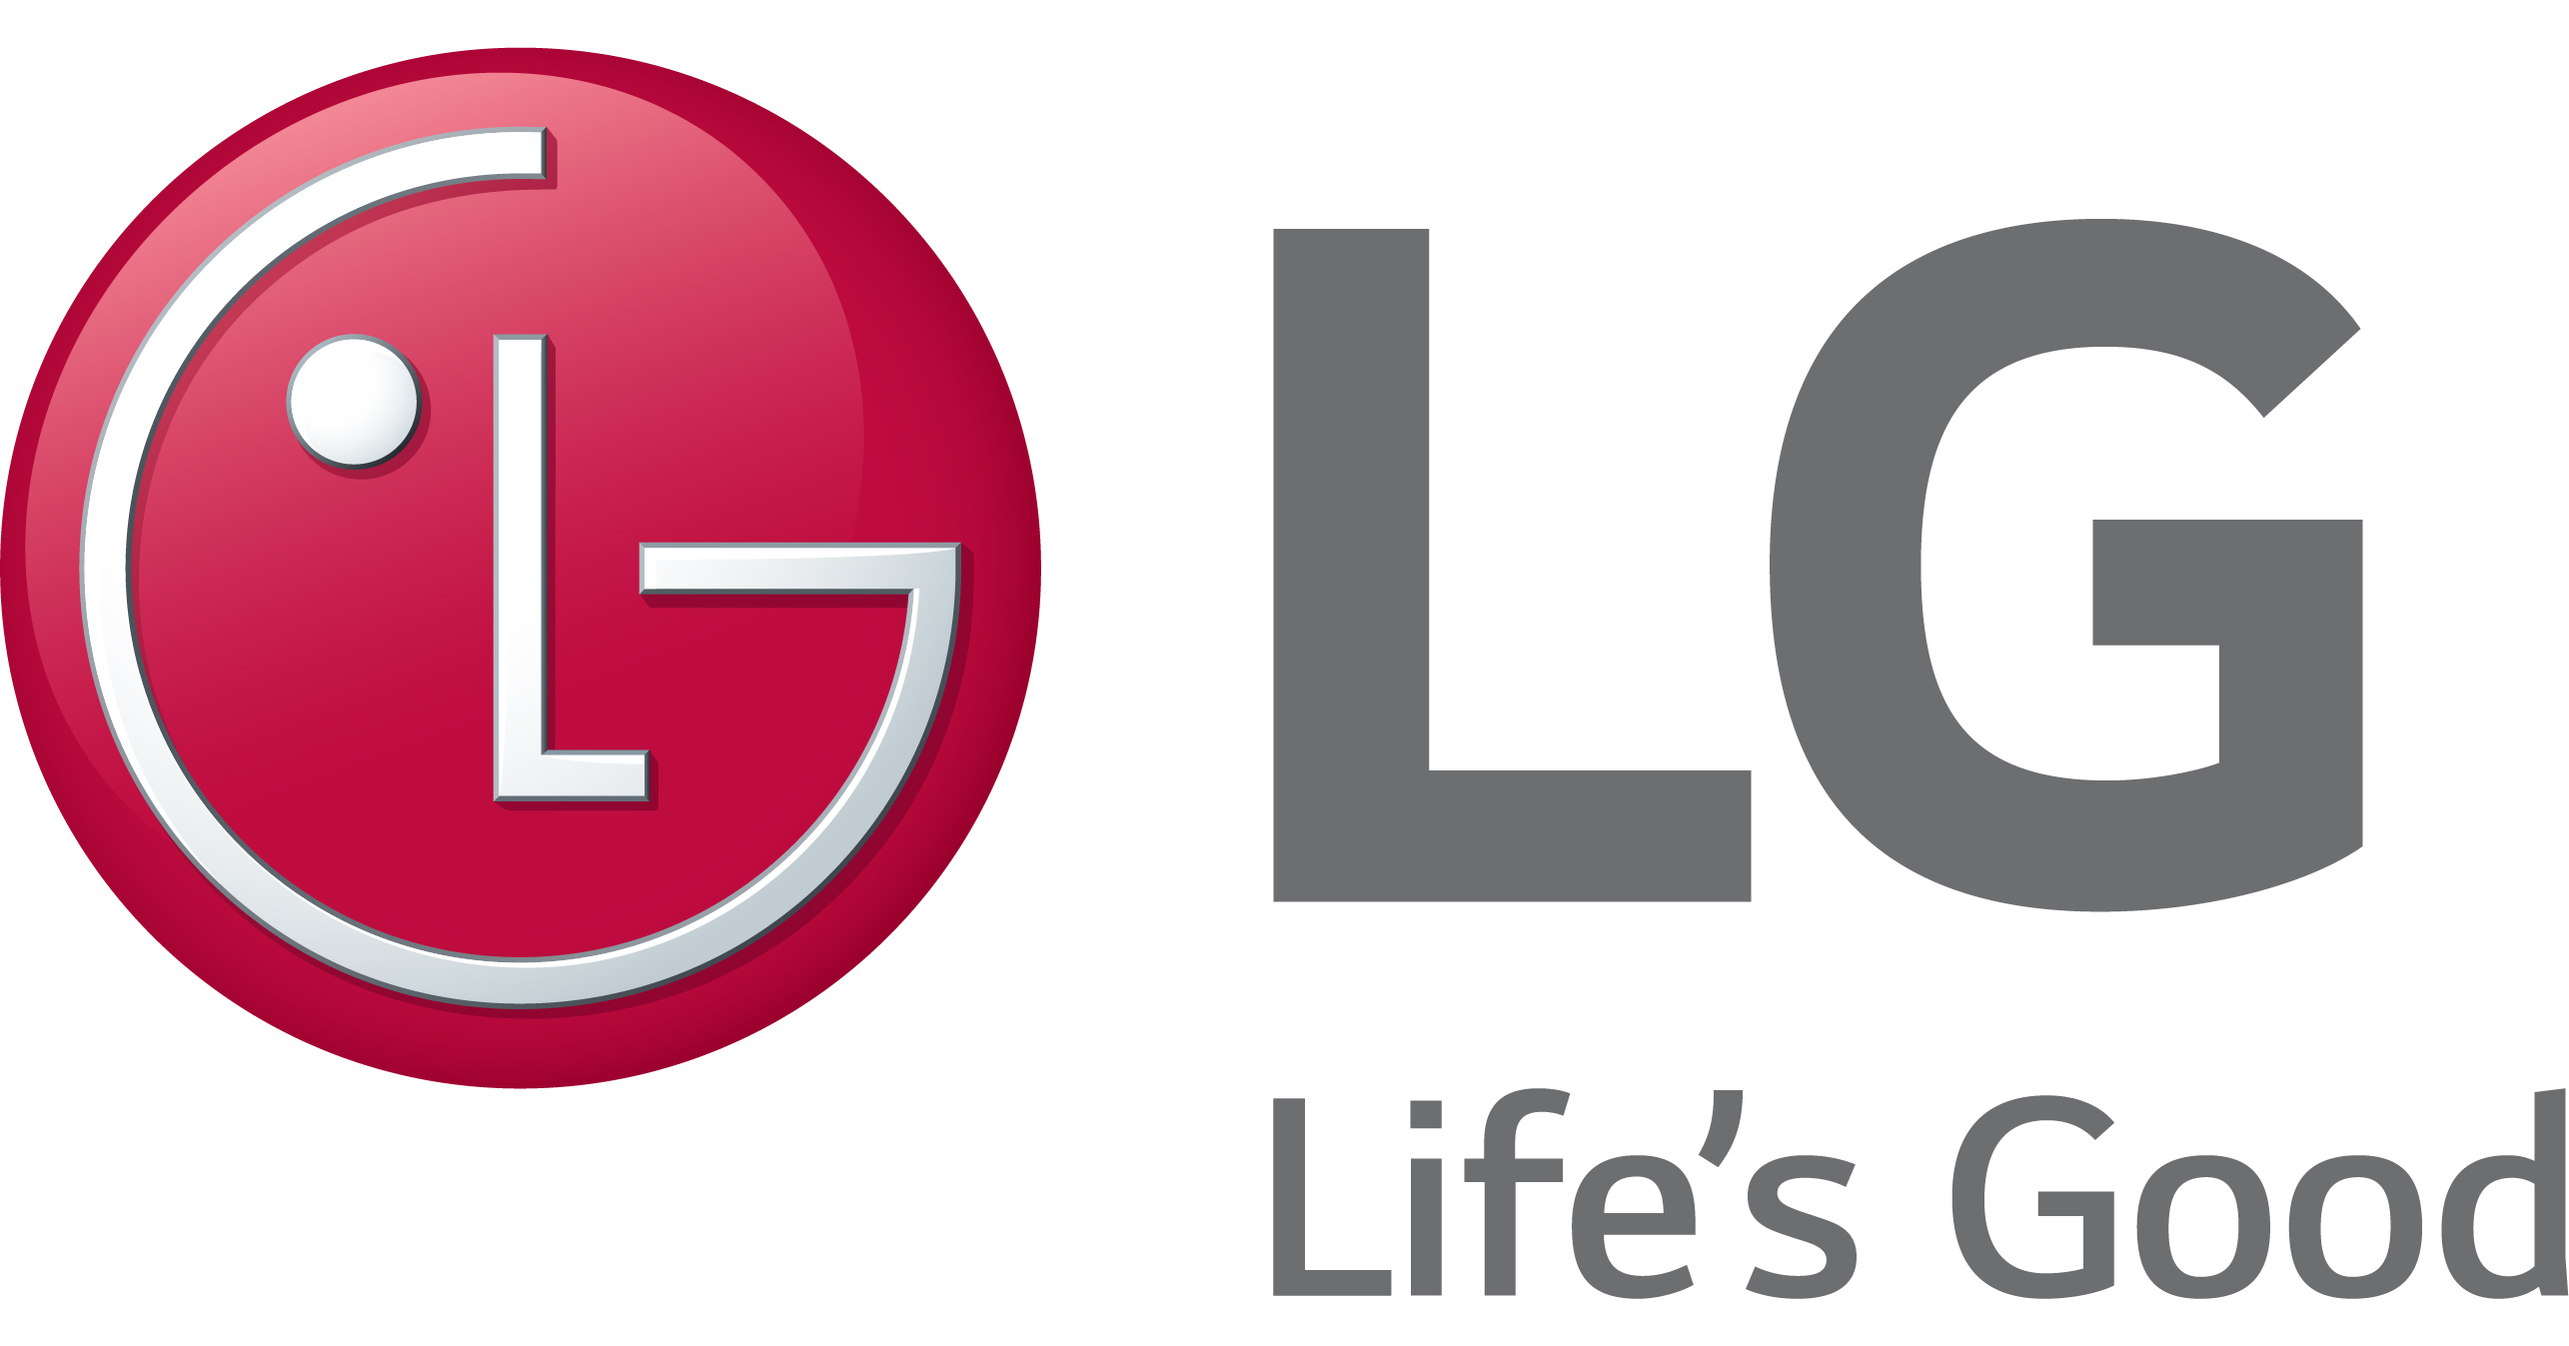 Save Up to $600 Off LG Washing Machines This Black Friday - CNET